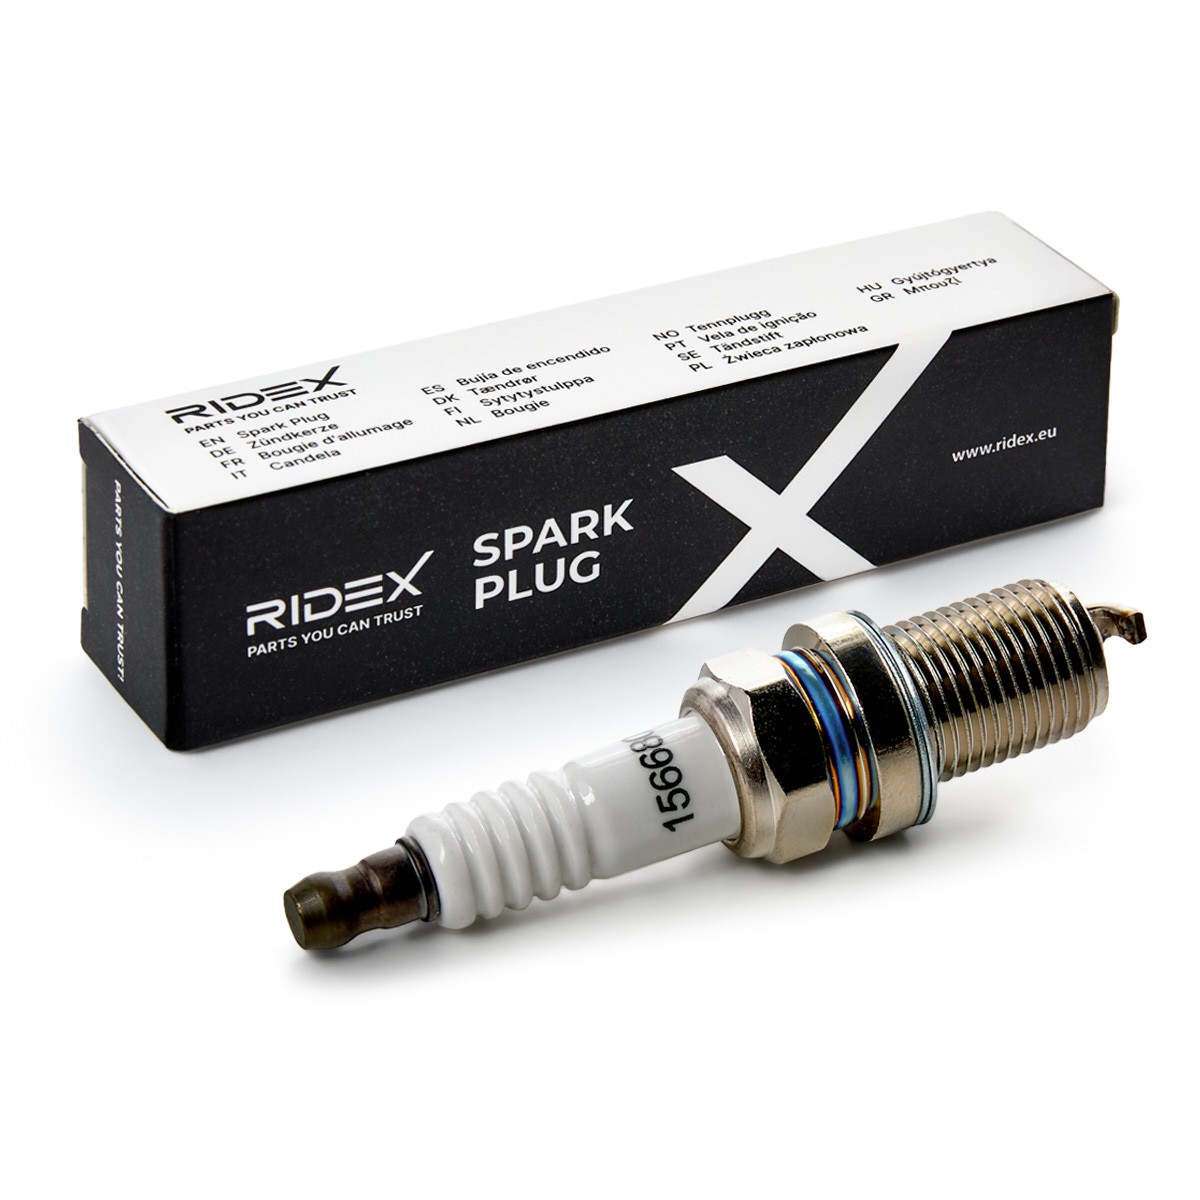 Great value for money - RIDEX Spark plug 686S0096